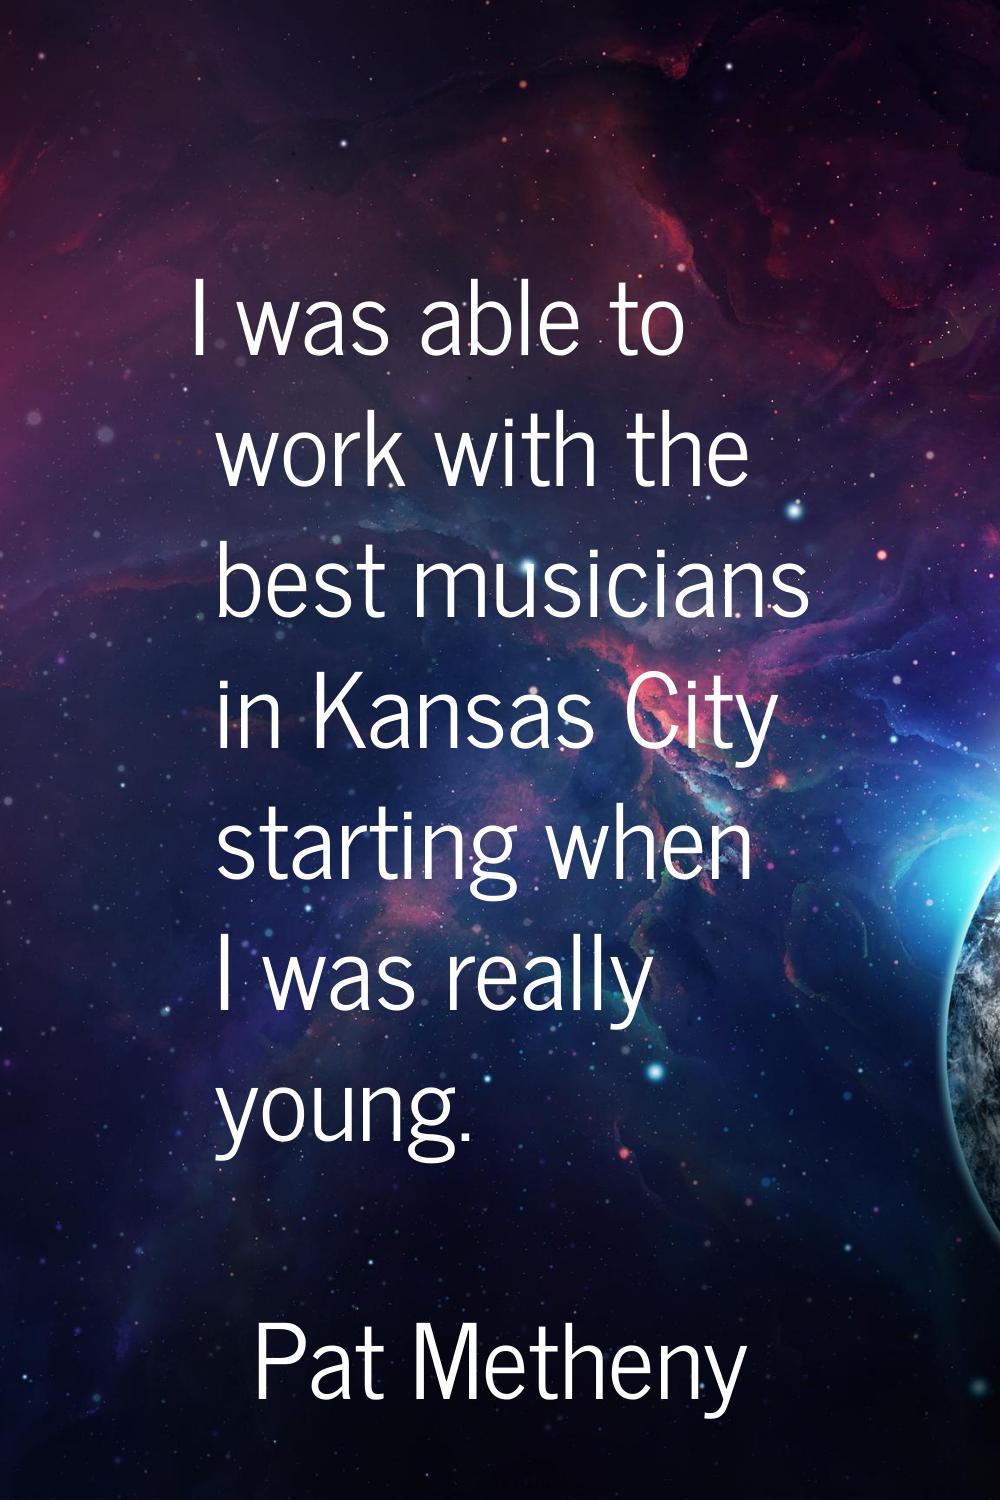 I was able to work with the best musicians in Kansas City starting when I was really young.